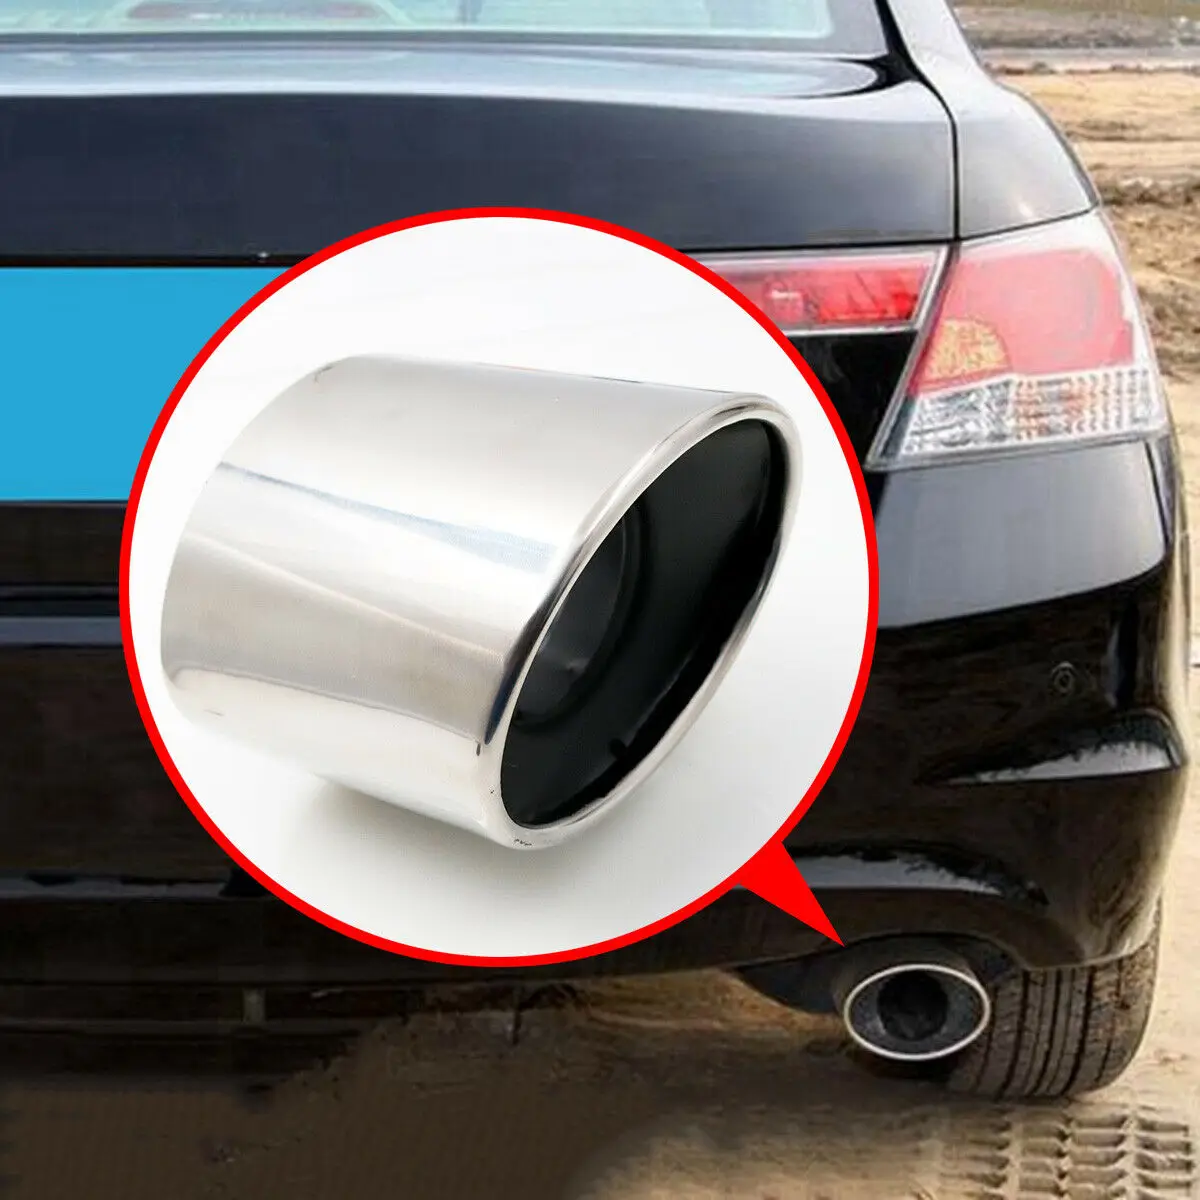 Stainless Steel Rear Exhaust End Pipe Muffler Cover Fit For Honda Accord 2008-2012 Car Tail Silencer Accessories